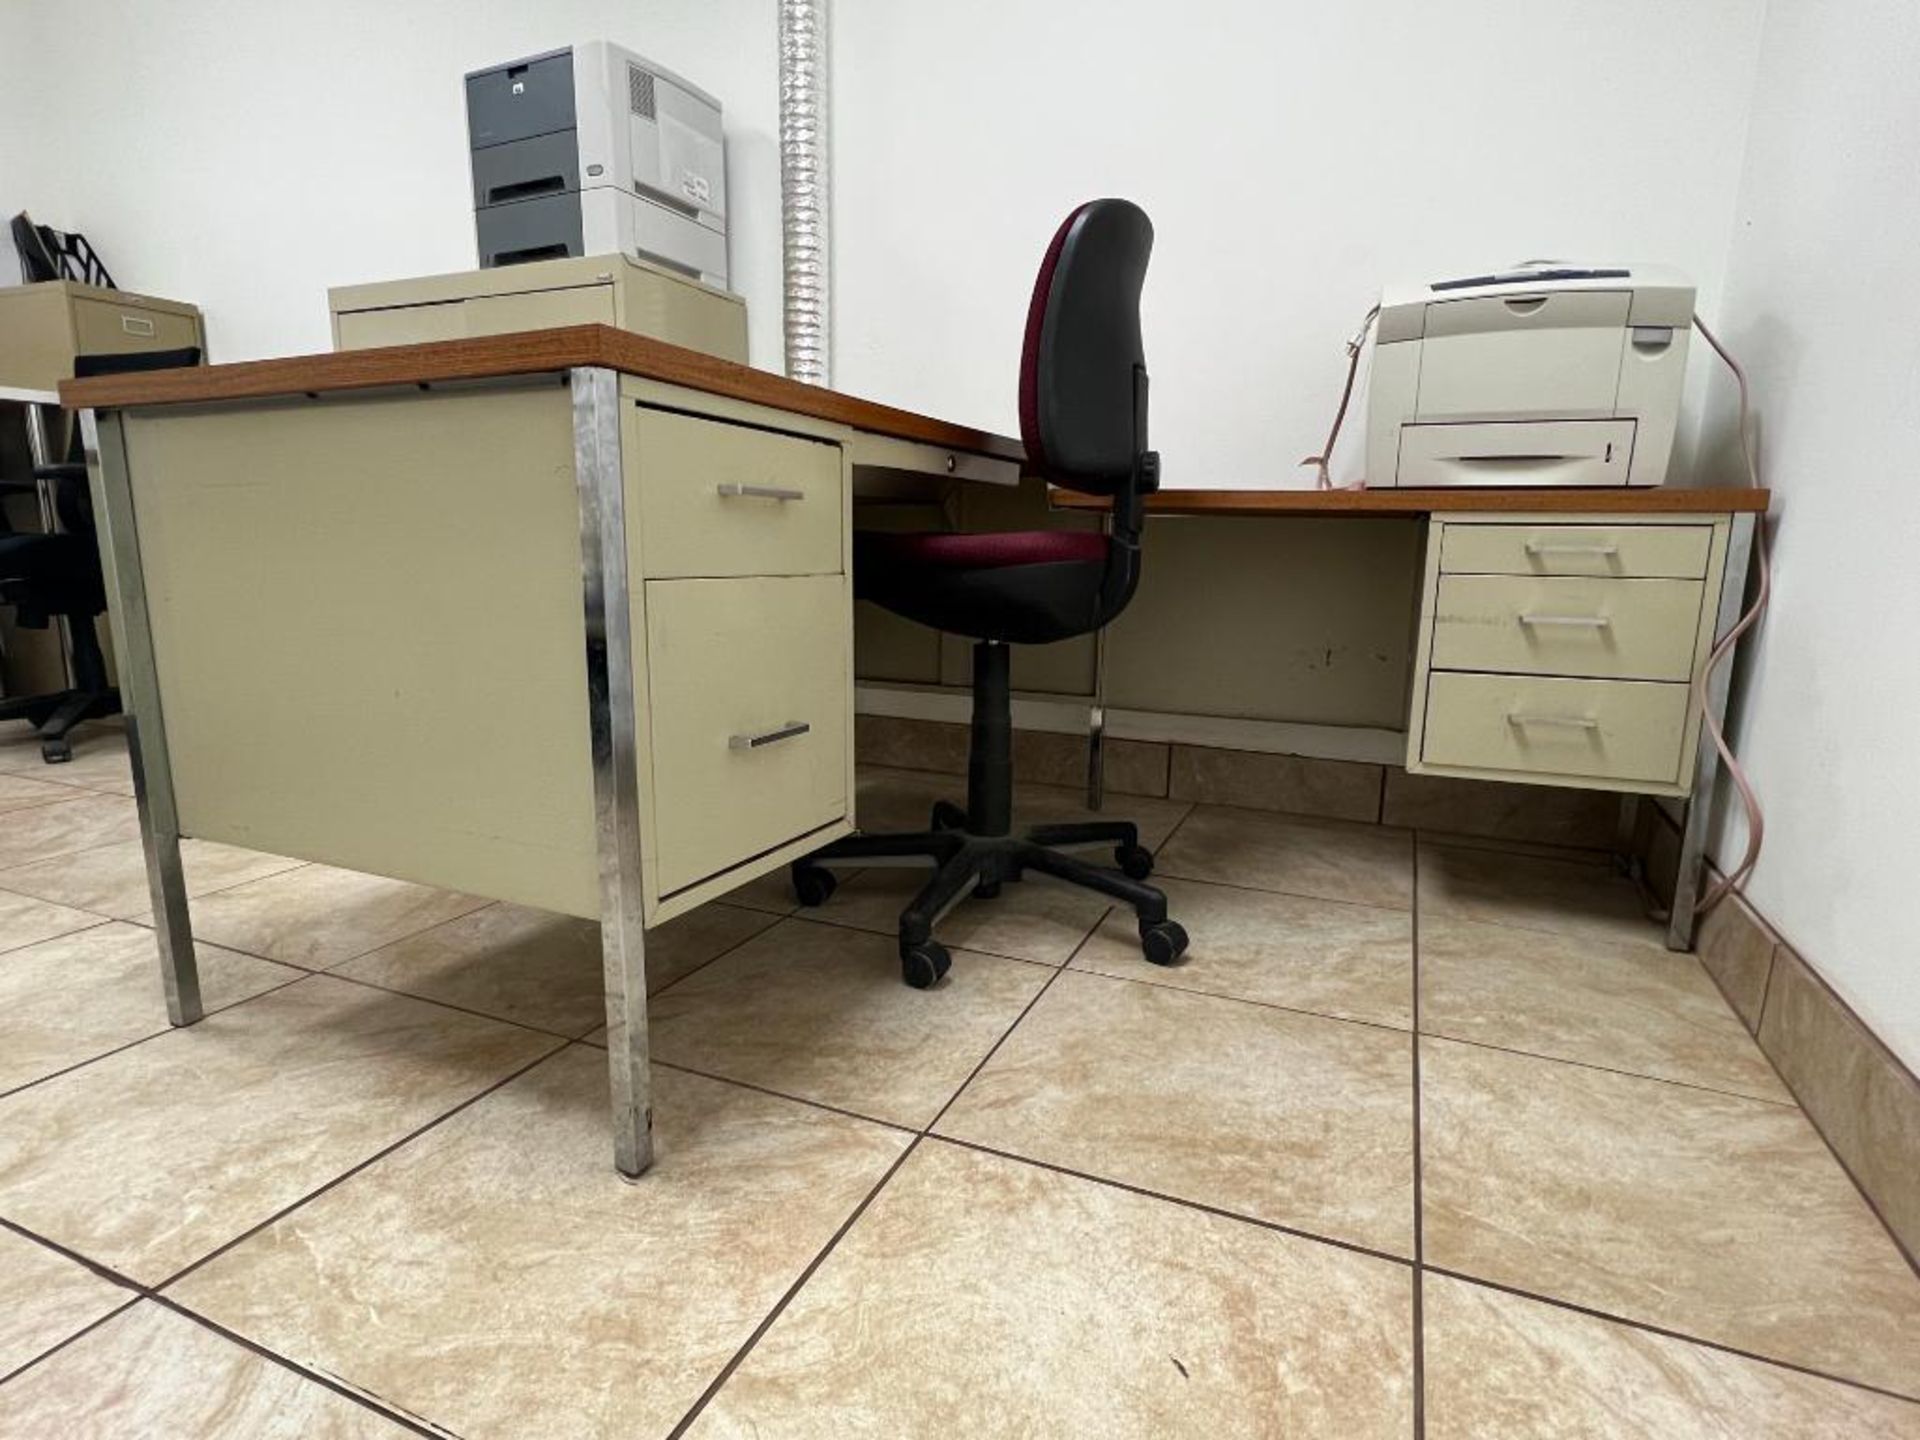 Assorted Office Furniture Including: (3) Desks, (2) Chairs, (2) Filing Cabinets - Image 3 of 6